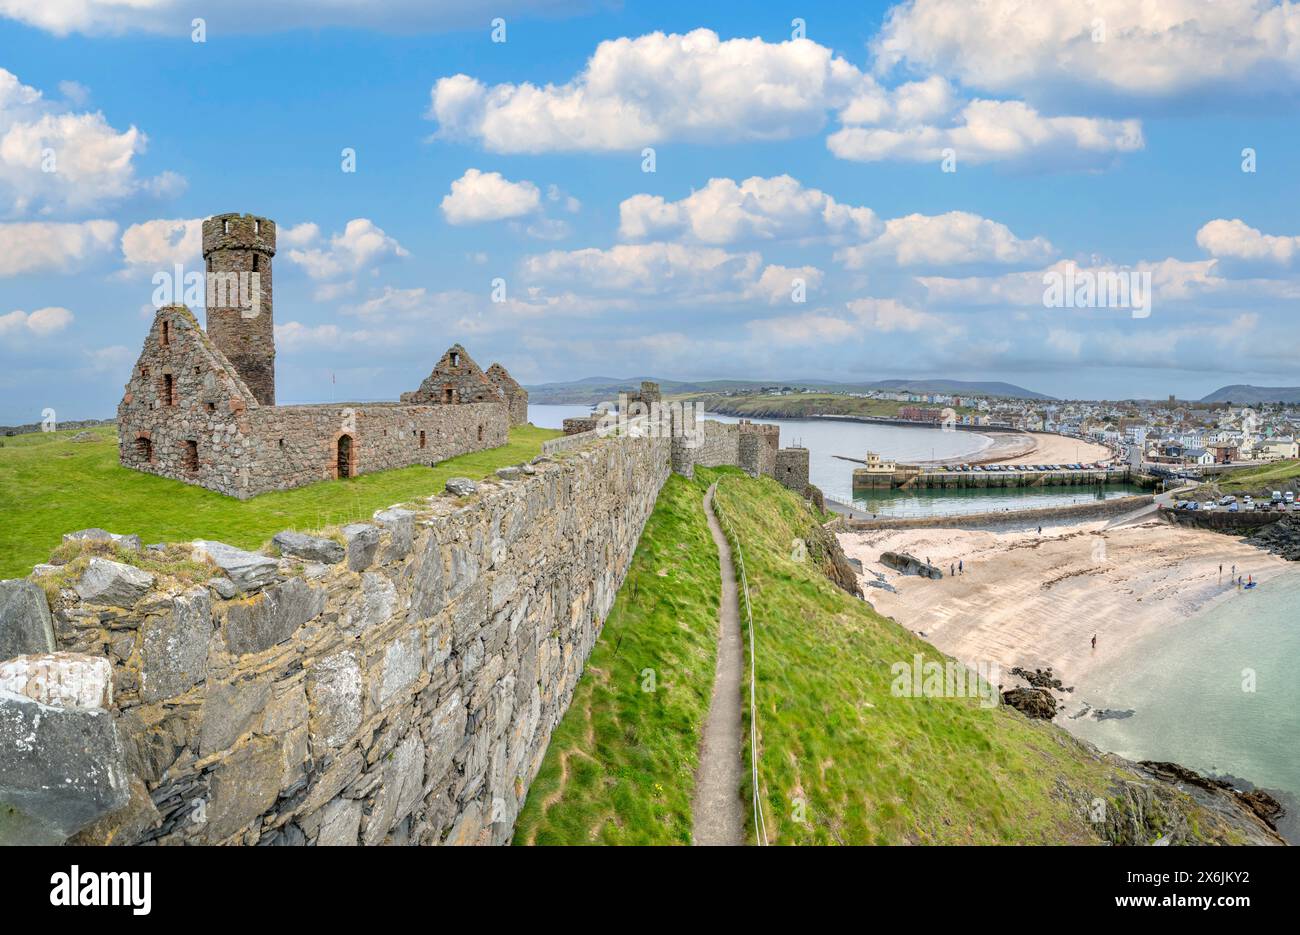 Inside the walls of Peel Castleand view over the town and beach, Peel, Isle of Man, England, UK Stock Photo